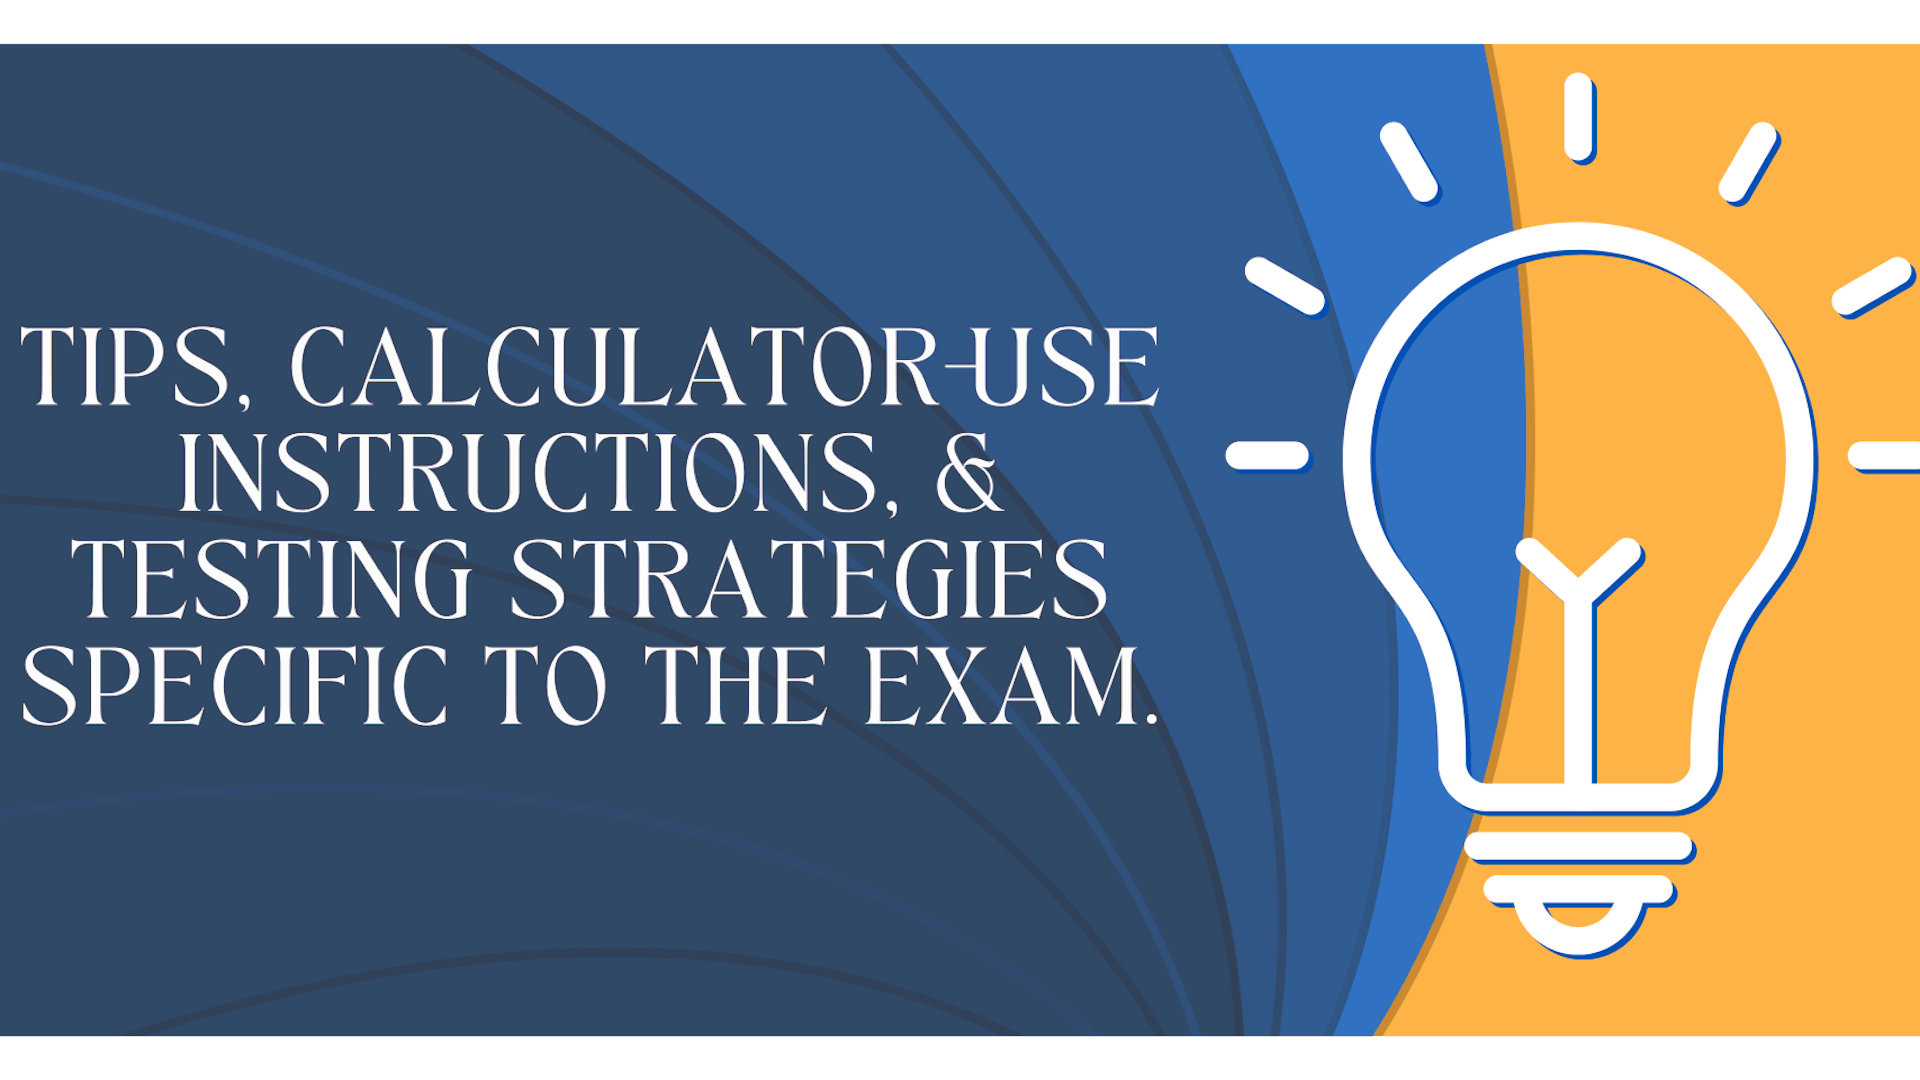 Tips, calculator-use instructions, and testing strategies specific to the exam